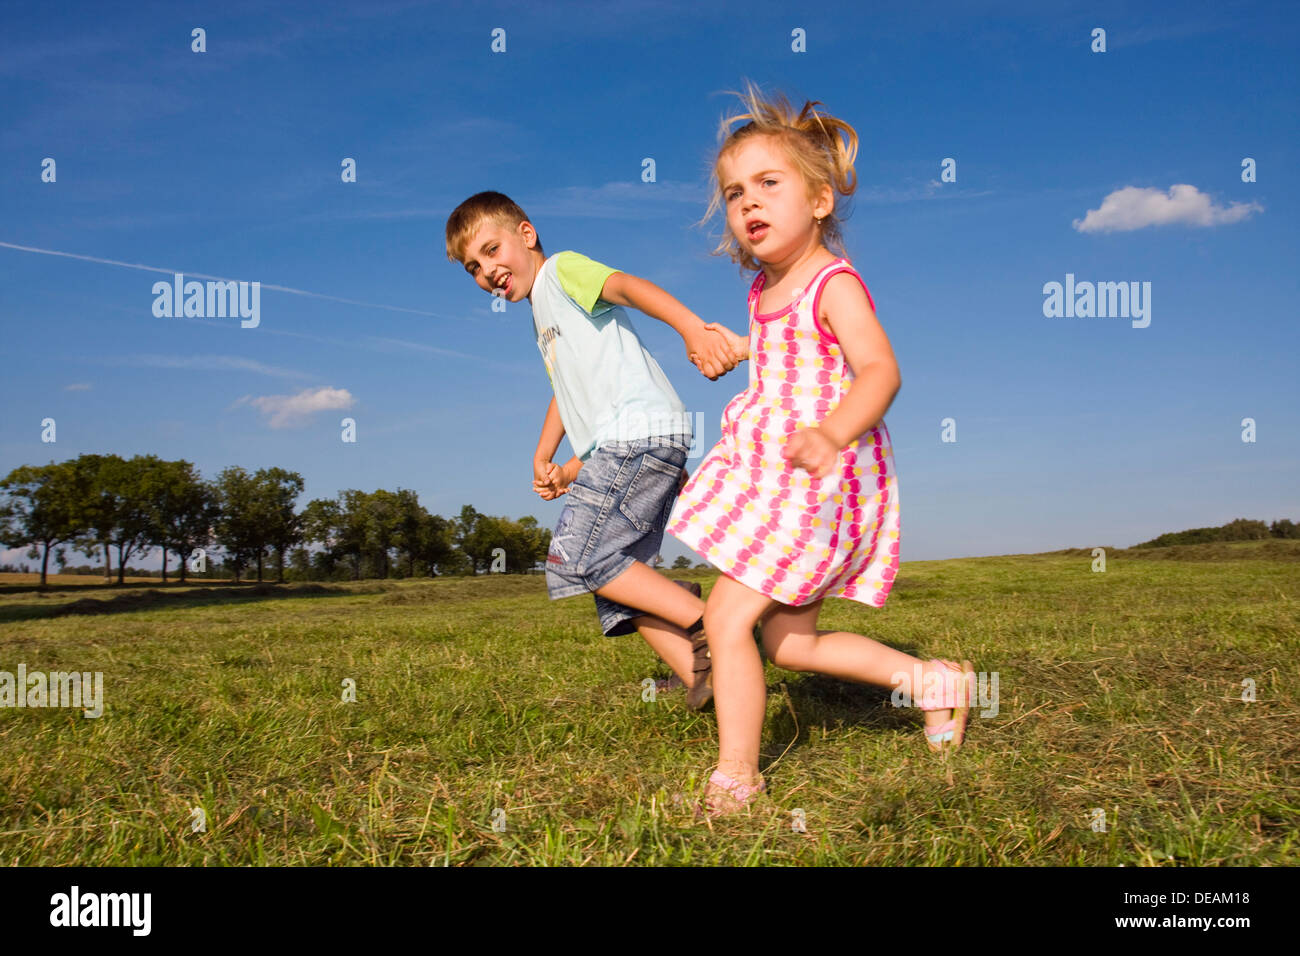 Little girl, 3 years, and her brother, 7 years, outdoors Stock Photo